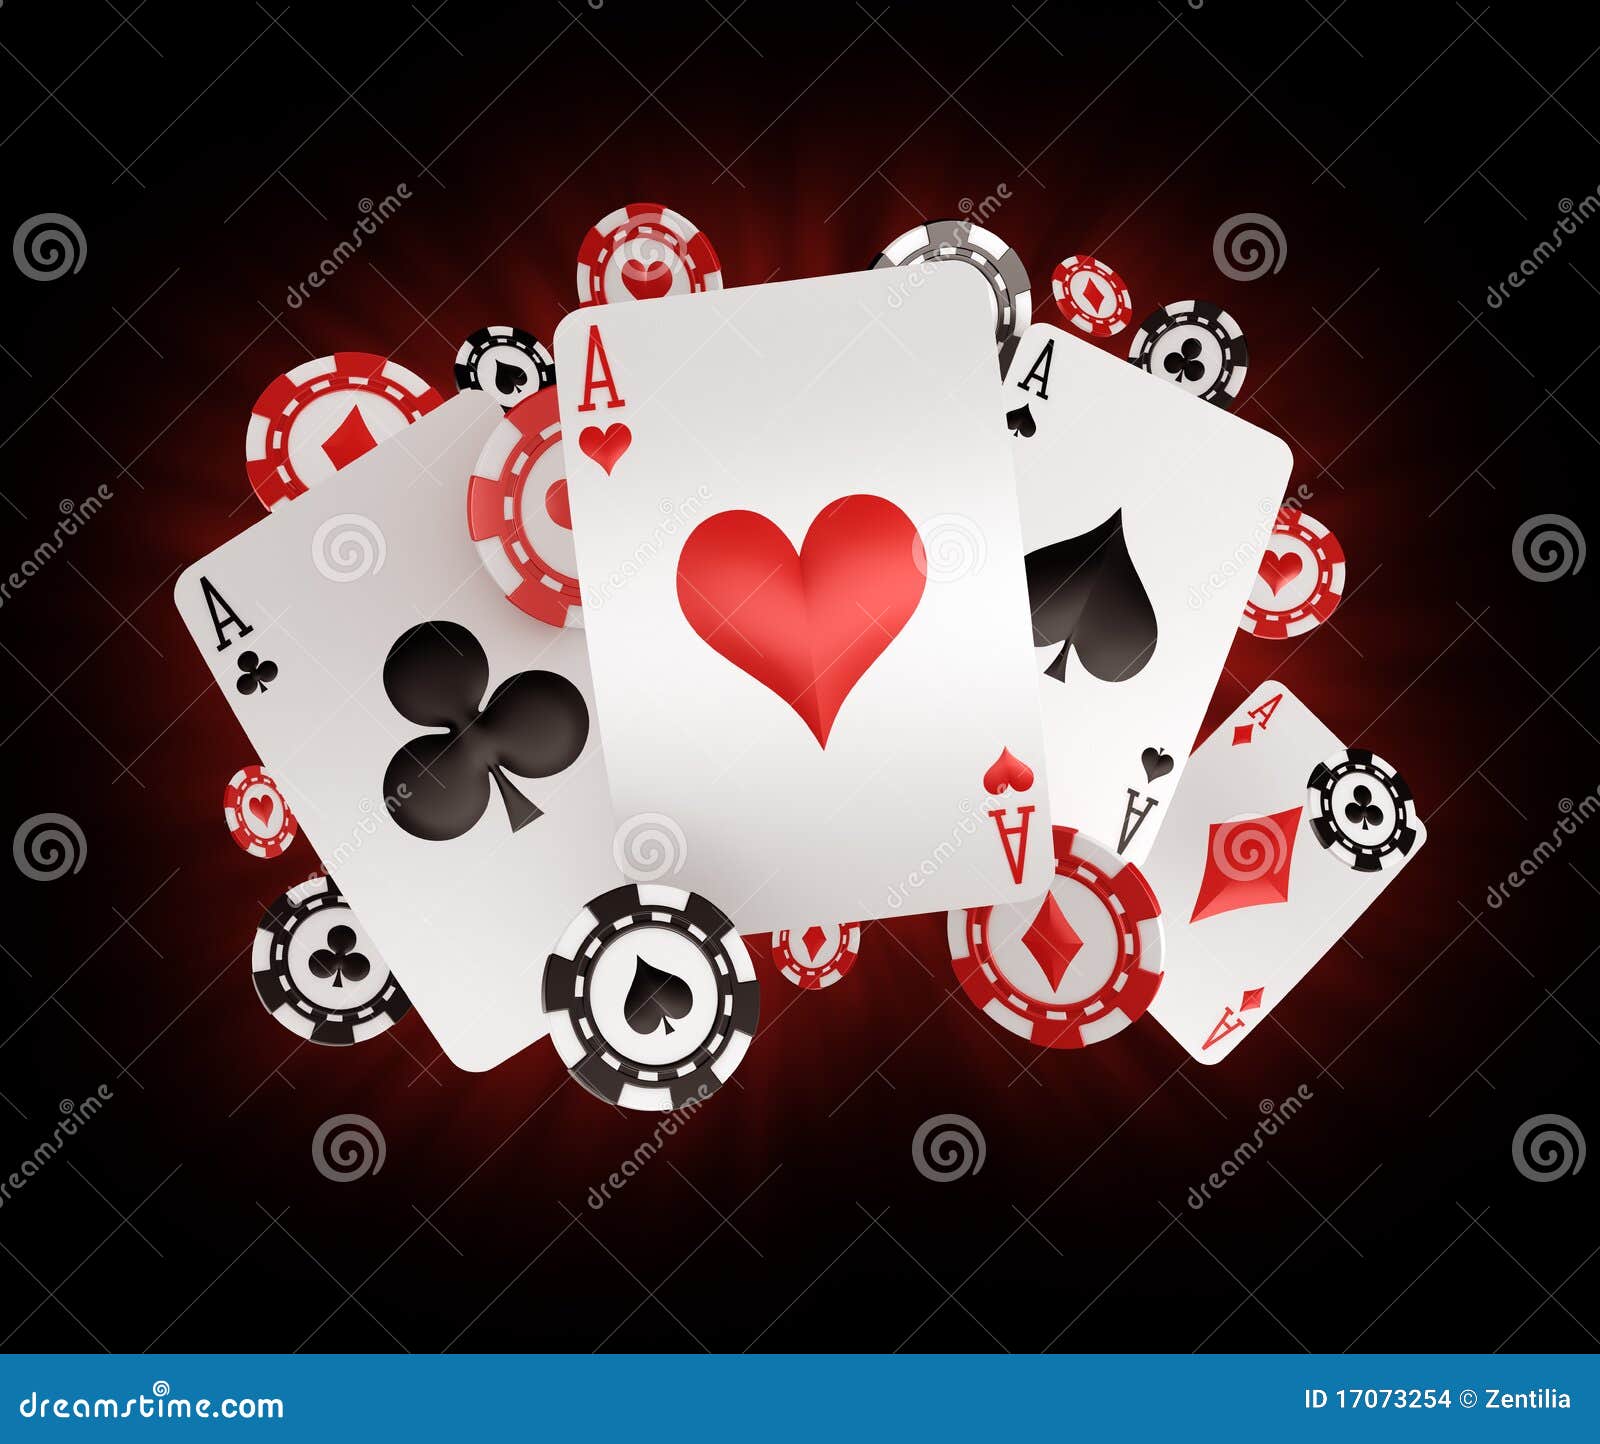 Chips and aces stock illustration. Illustration of ...